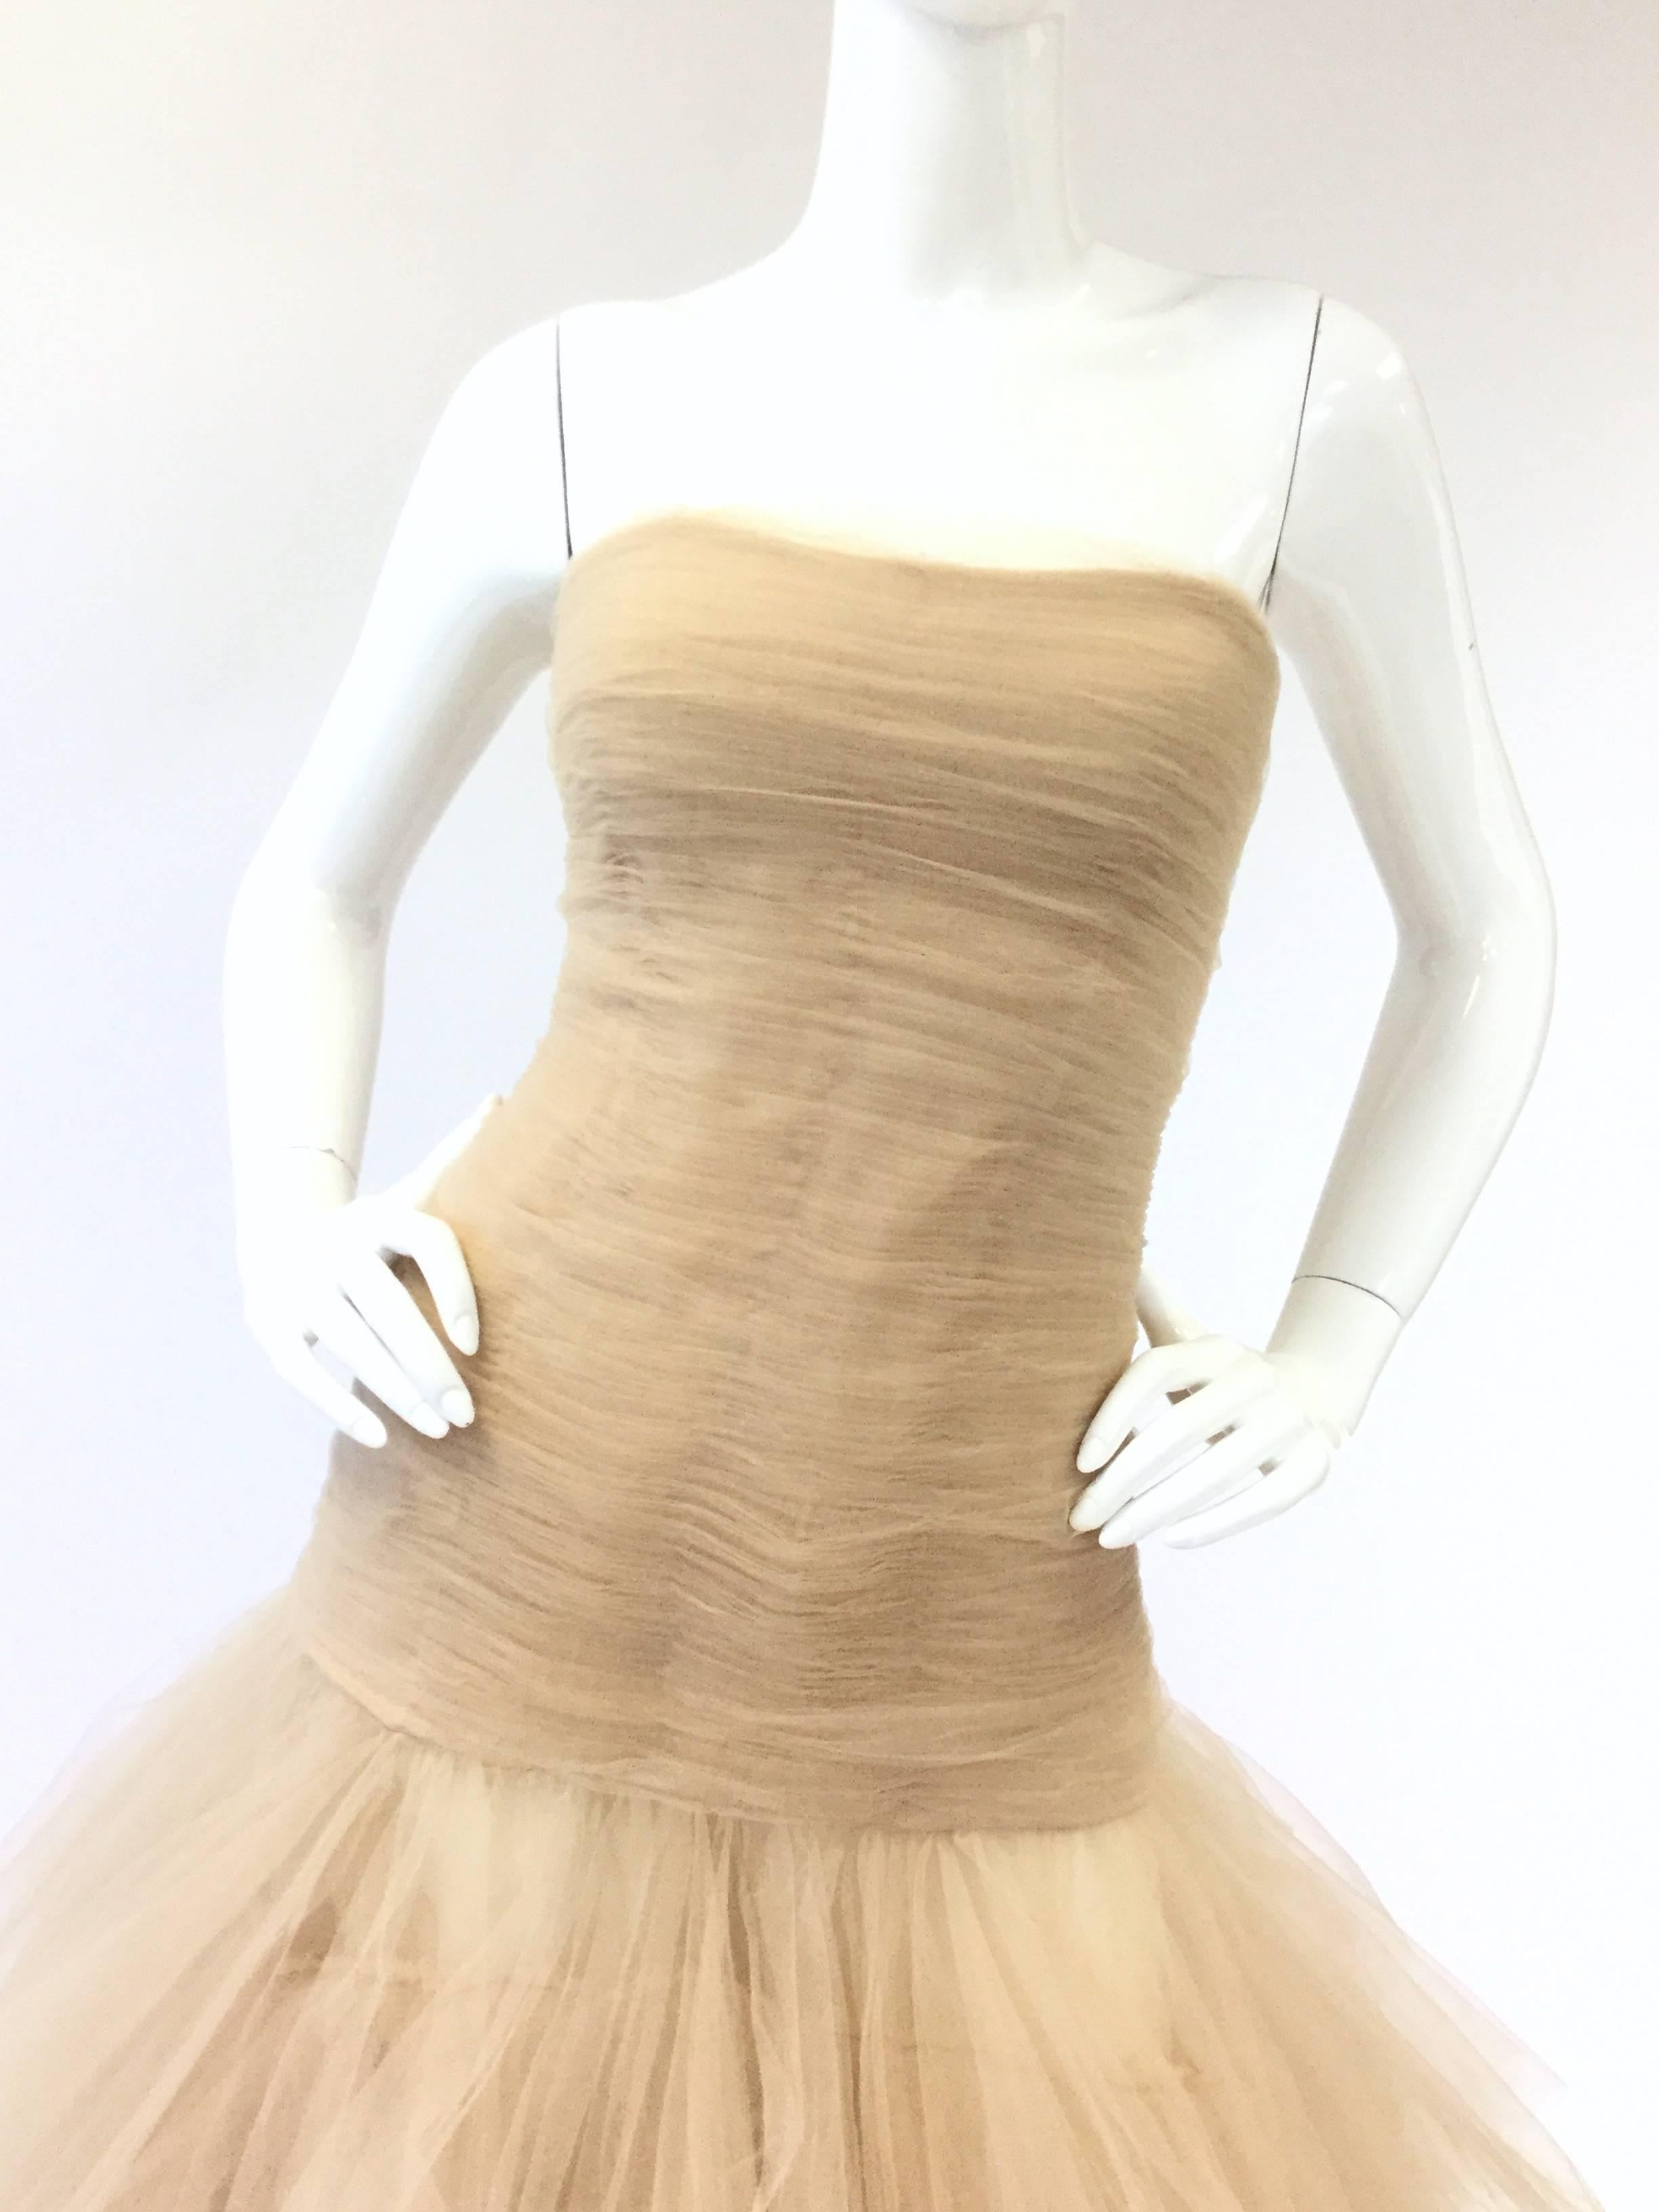 

This fantastic gown by Oscar de la Renta gown features a horizontally pleated extended bodice with a slight sweetheart neckline. The mini pleats delicately curve to the structured, boned bodice. The skirt, with its many angular tiers, billows out